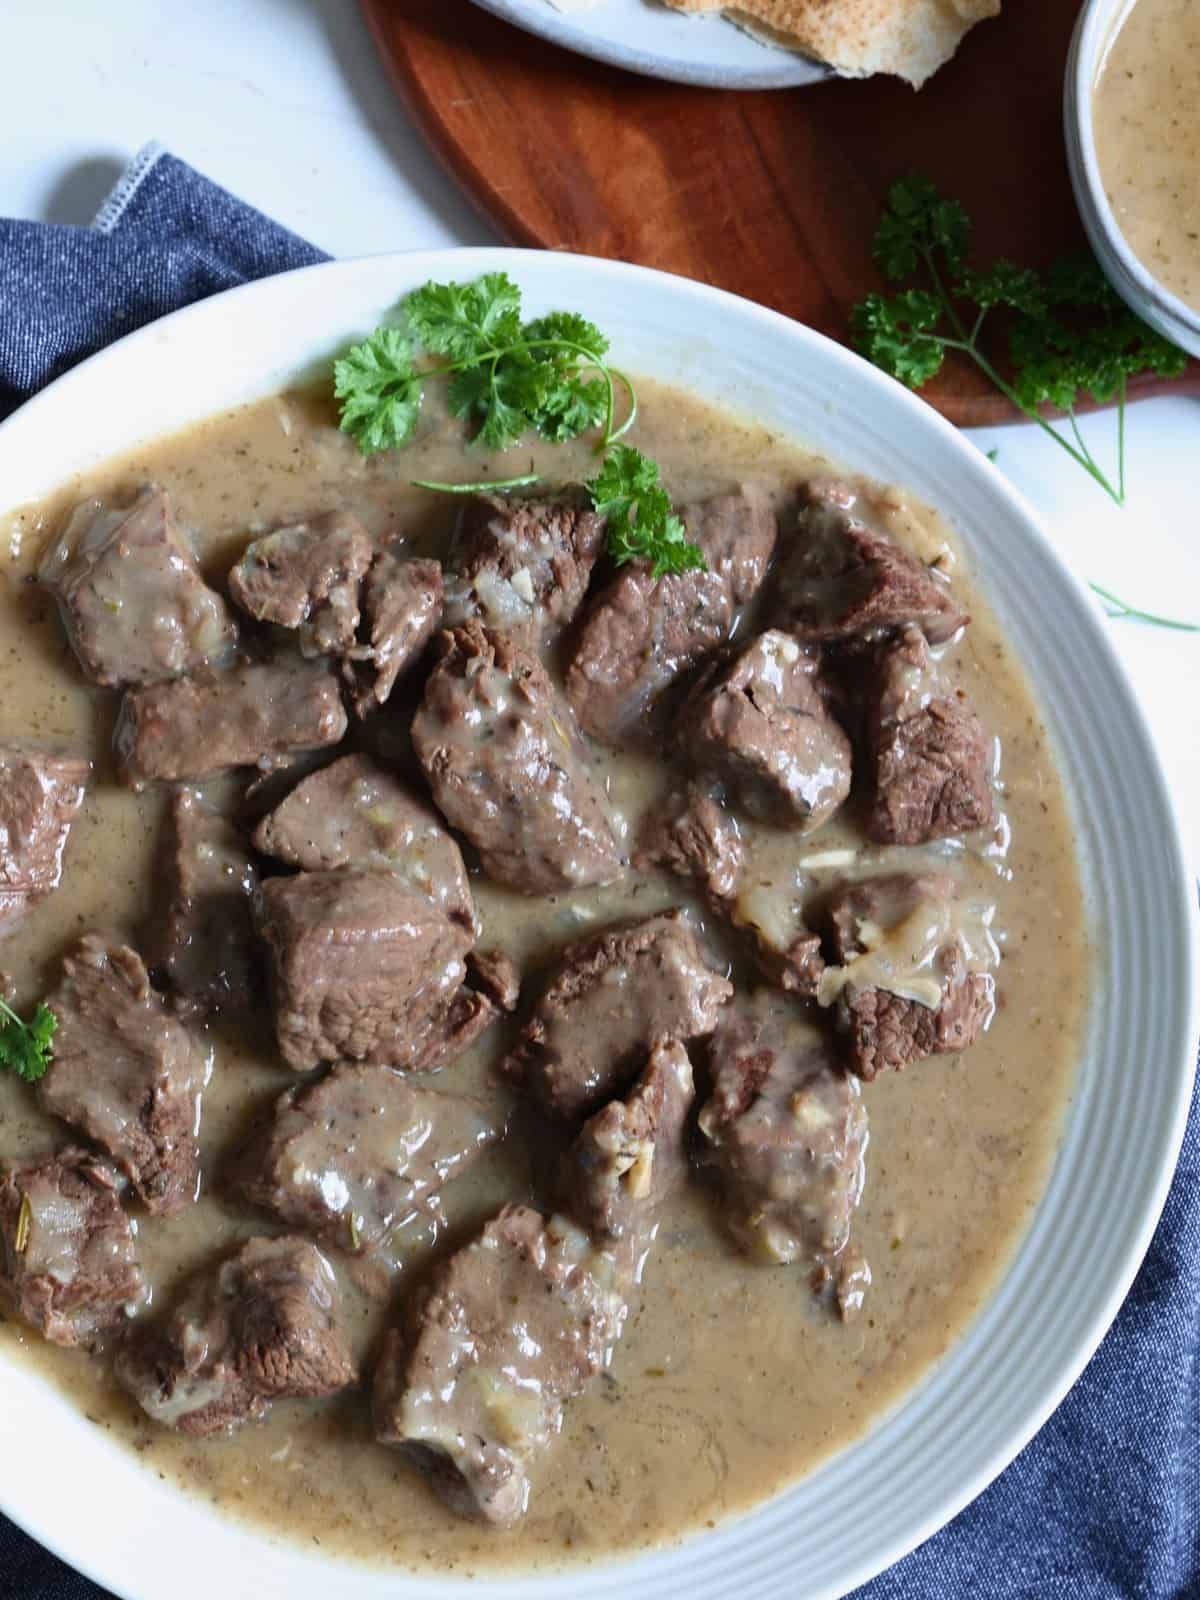 Instant pot beef tips in gravy garnished with herbs on a plate